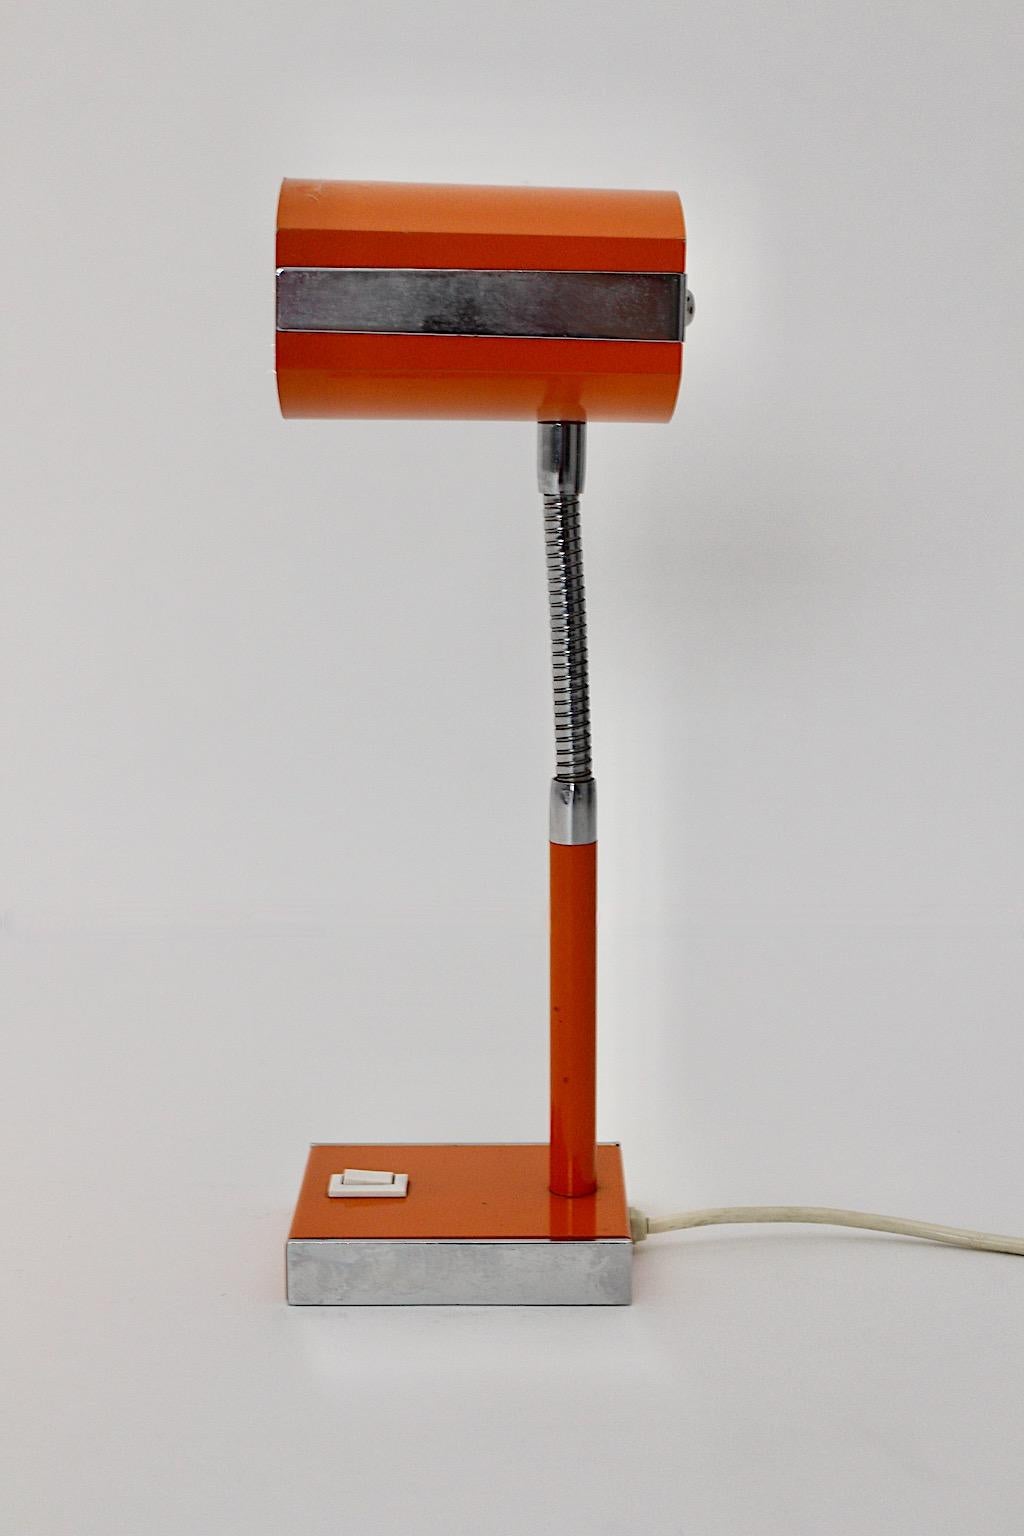 Space Age vintage desk lamp from metal in orange and silver color tones 1960s Germany.
A wonderful table lamp or desk lamp in playful orange color with a flexible silver stem and a rectangular base from the 1960s.
The table lamp shows an on/off